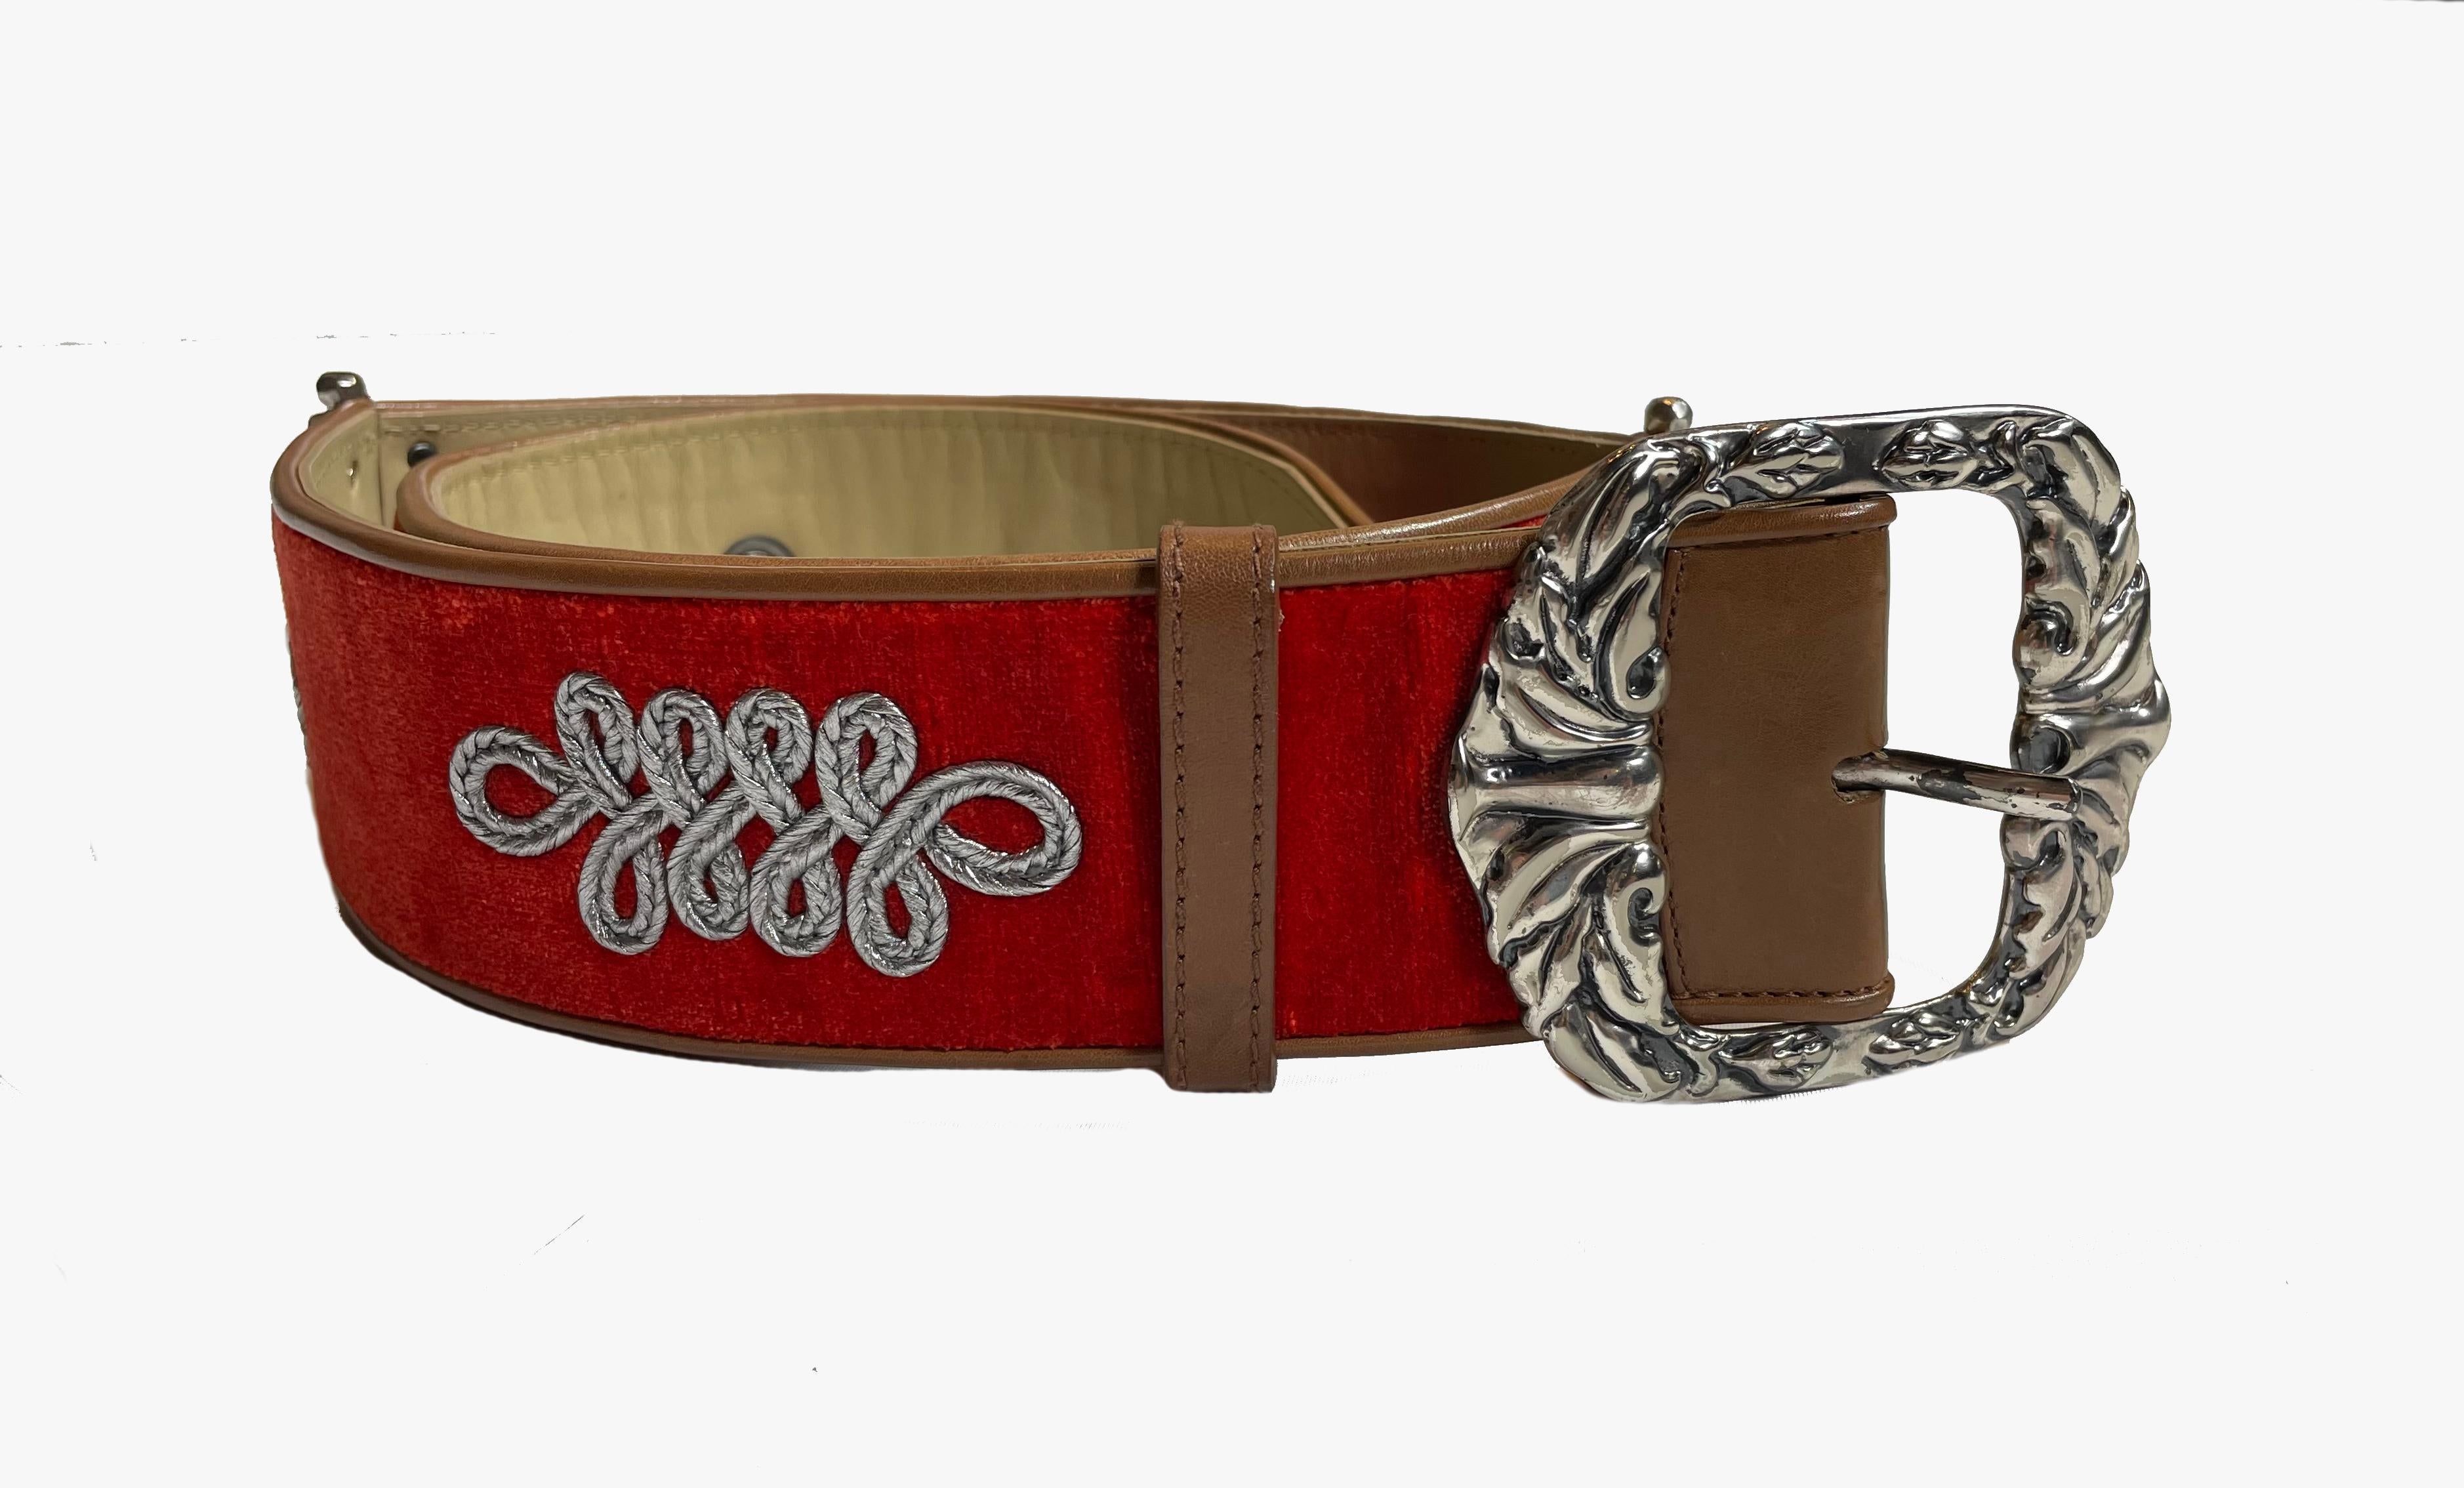 Bottega Venetta runway poppy red velvet belt with silver buckle by Tomas Maier. Decorated with silver-tone embroidery. 
Season: Spring-Summer 2006 
Composition: 100% leather, 100% velvet, silver metal. 
Condition: Good. Some signs of wear at